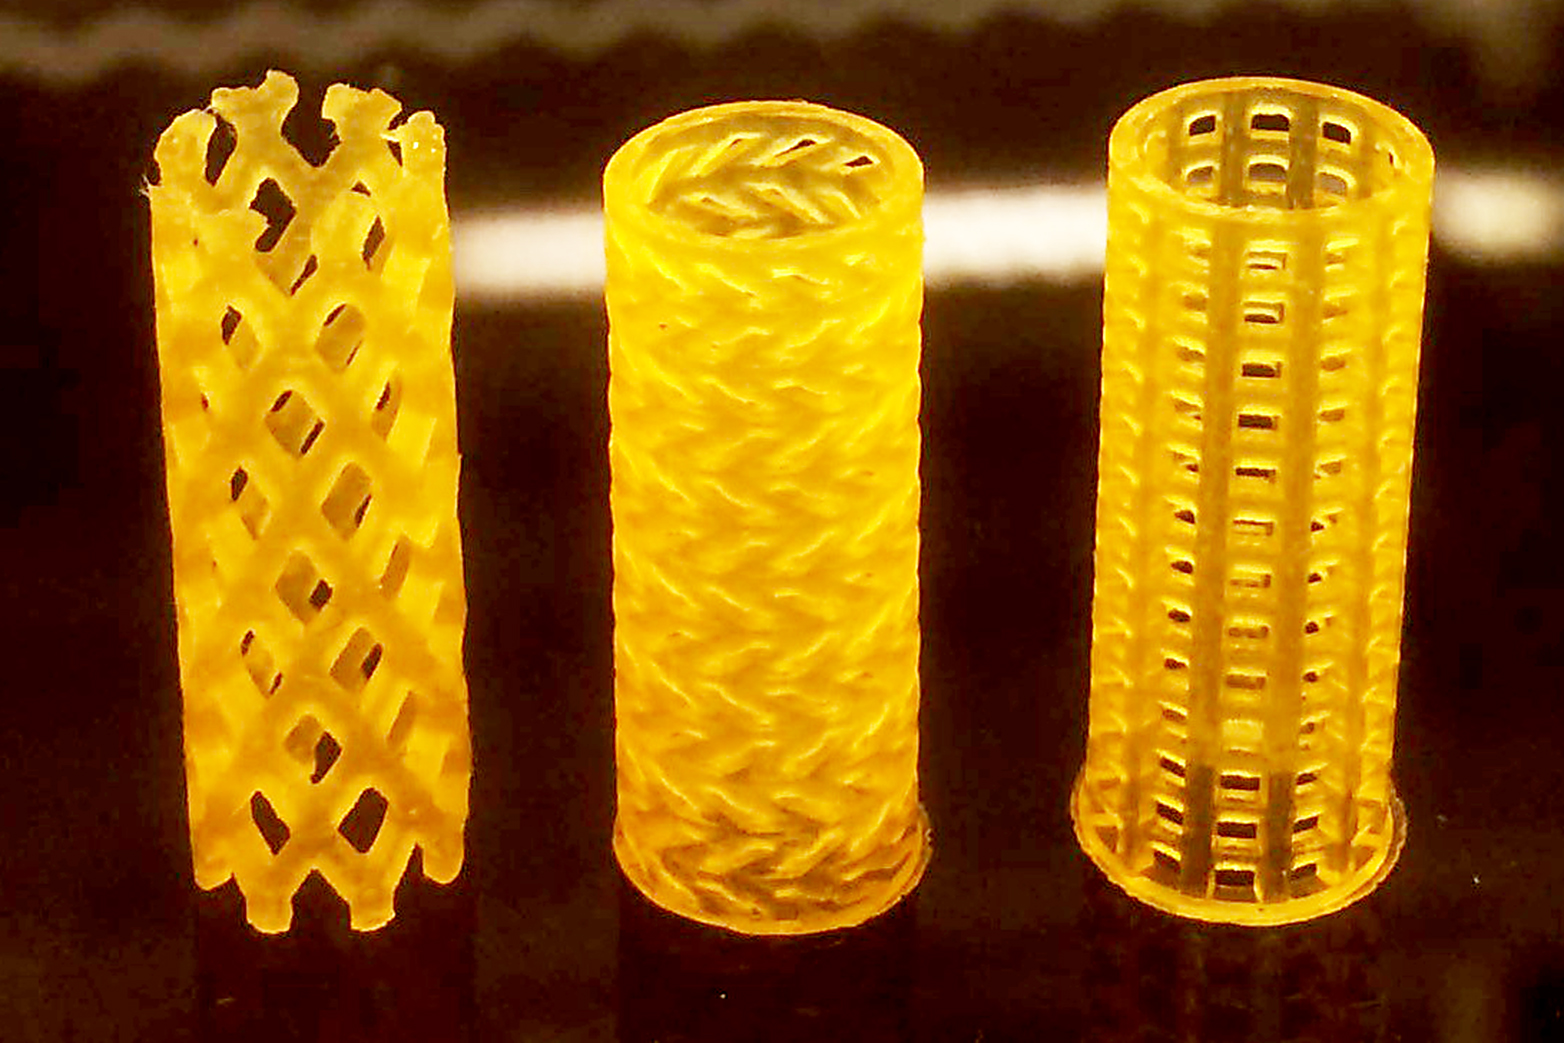 Three prototypes of the airway stents with different designs